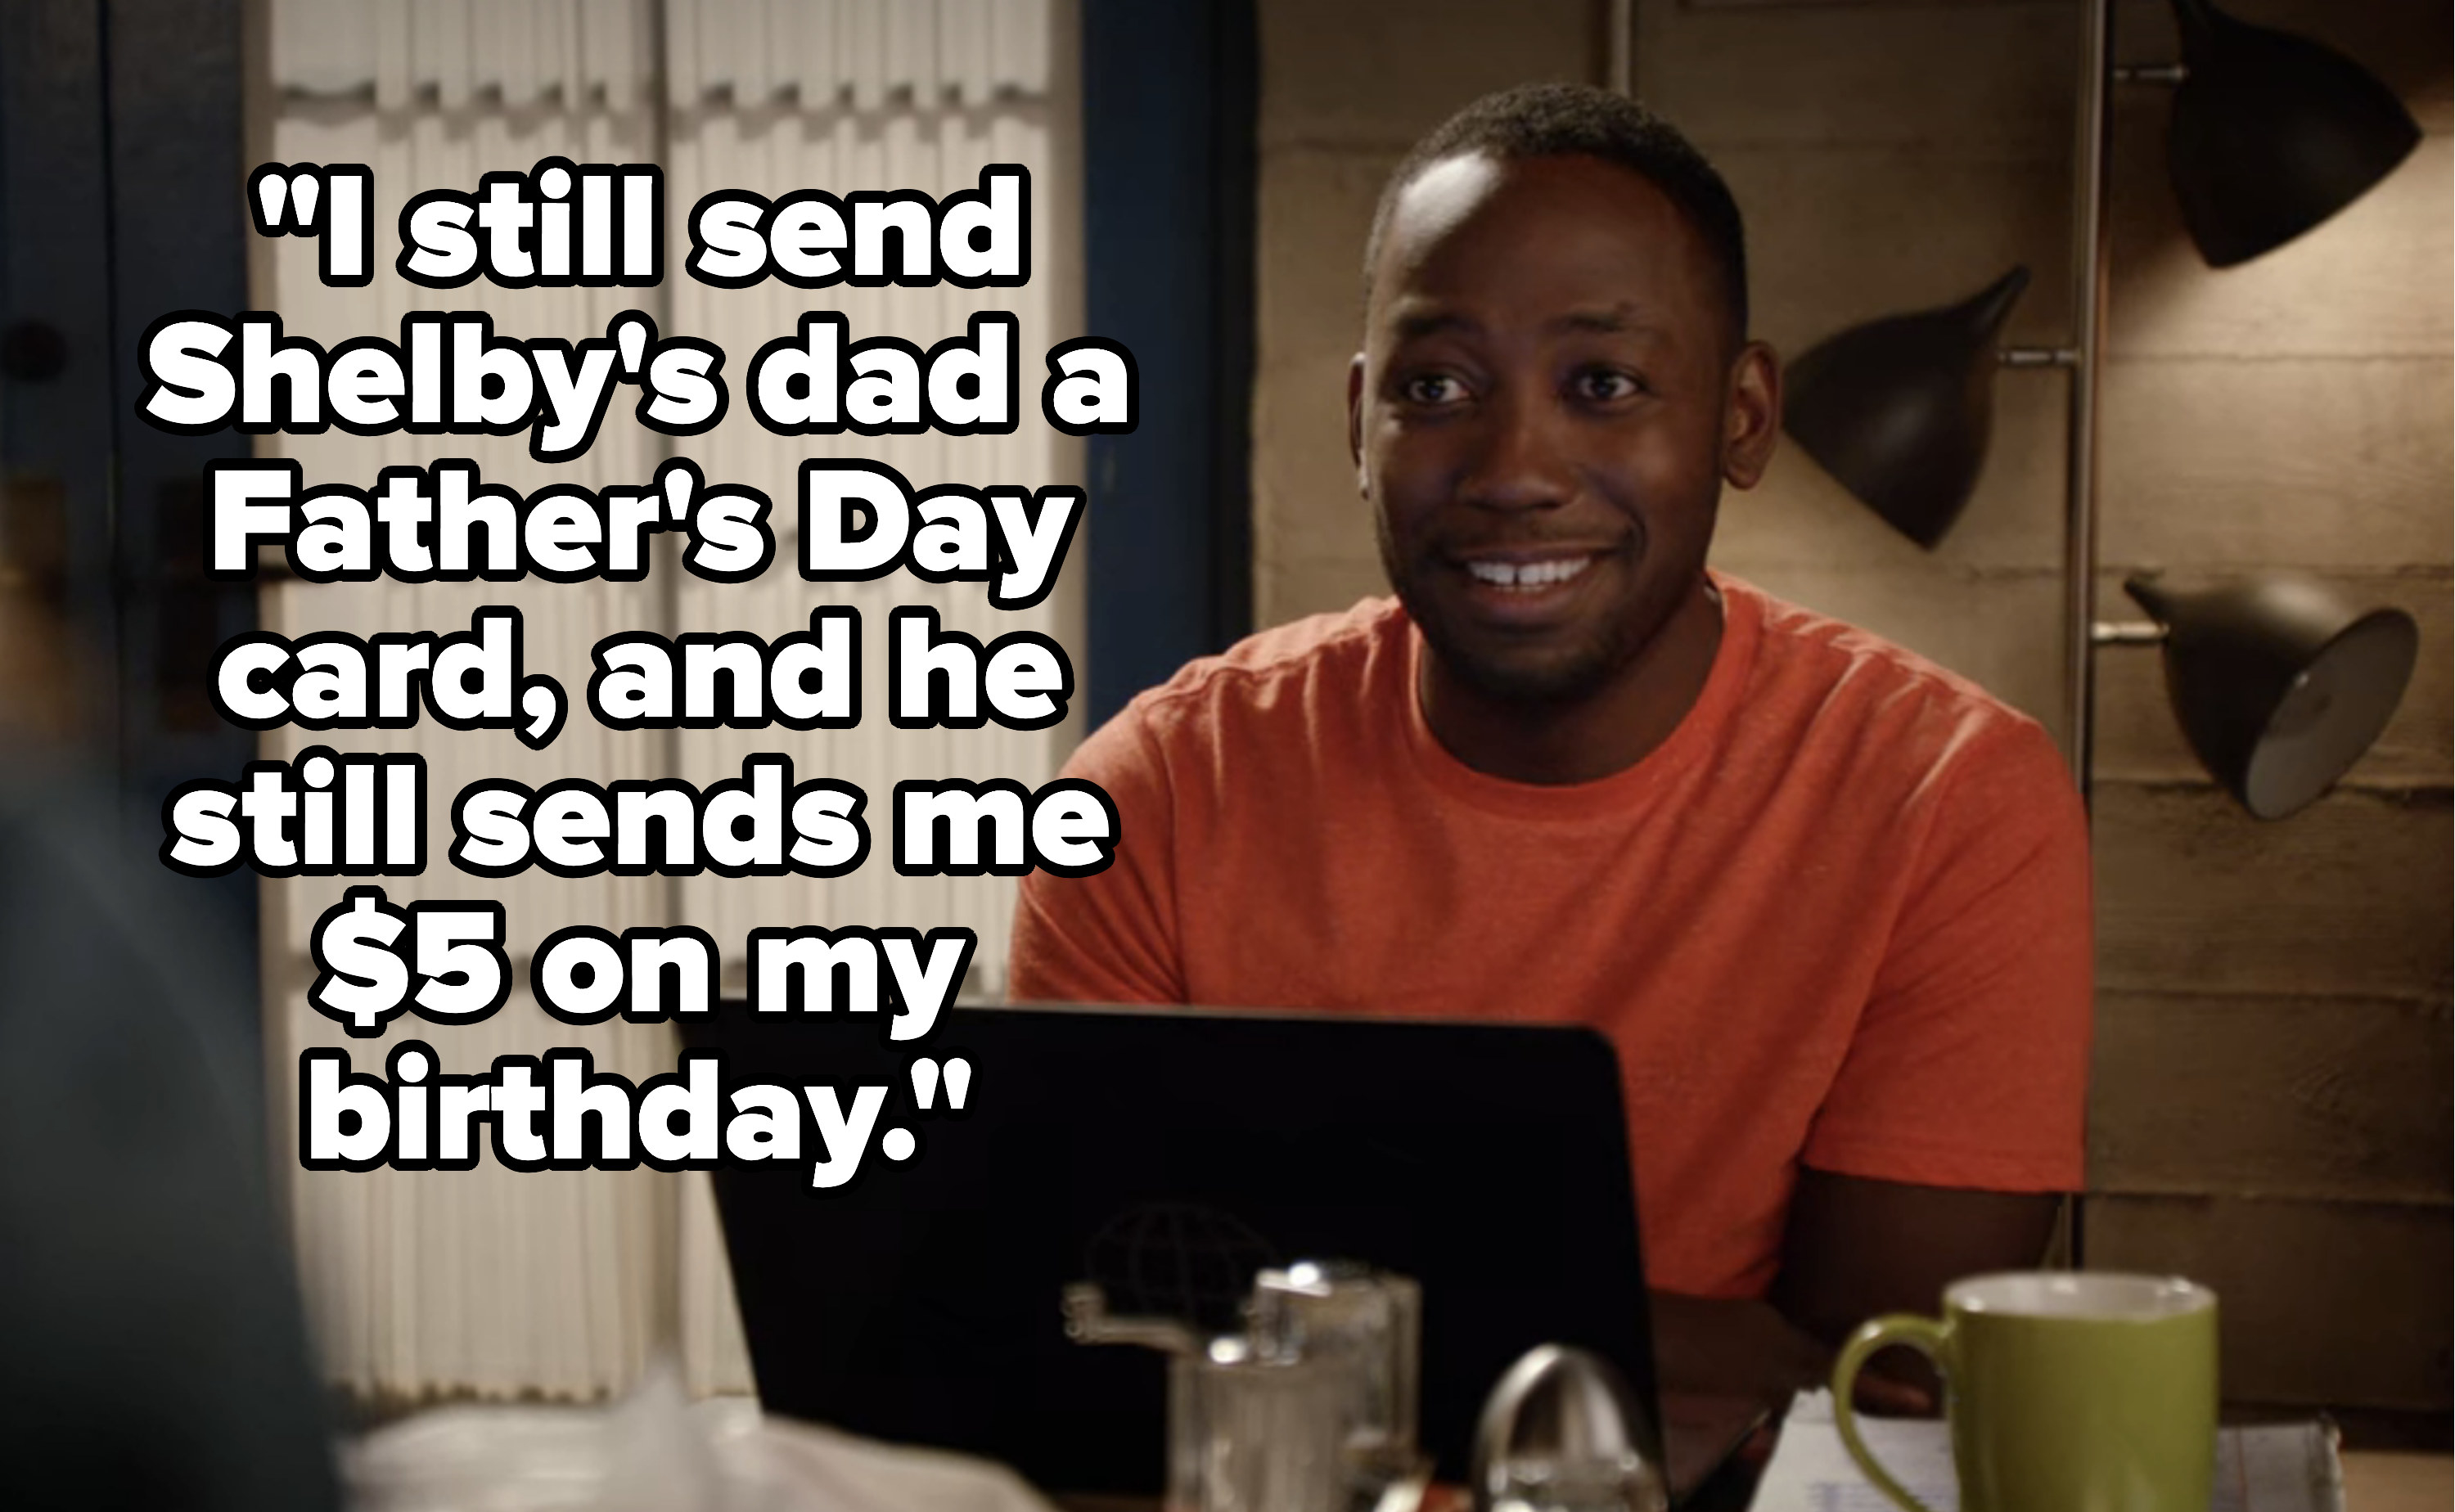 Winston saying, &quot;I still send Shelby&#x27;s dad a Father&#x27;s Day card, and he still sends me $5 on my birthday.&quot;